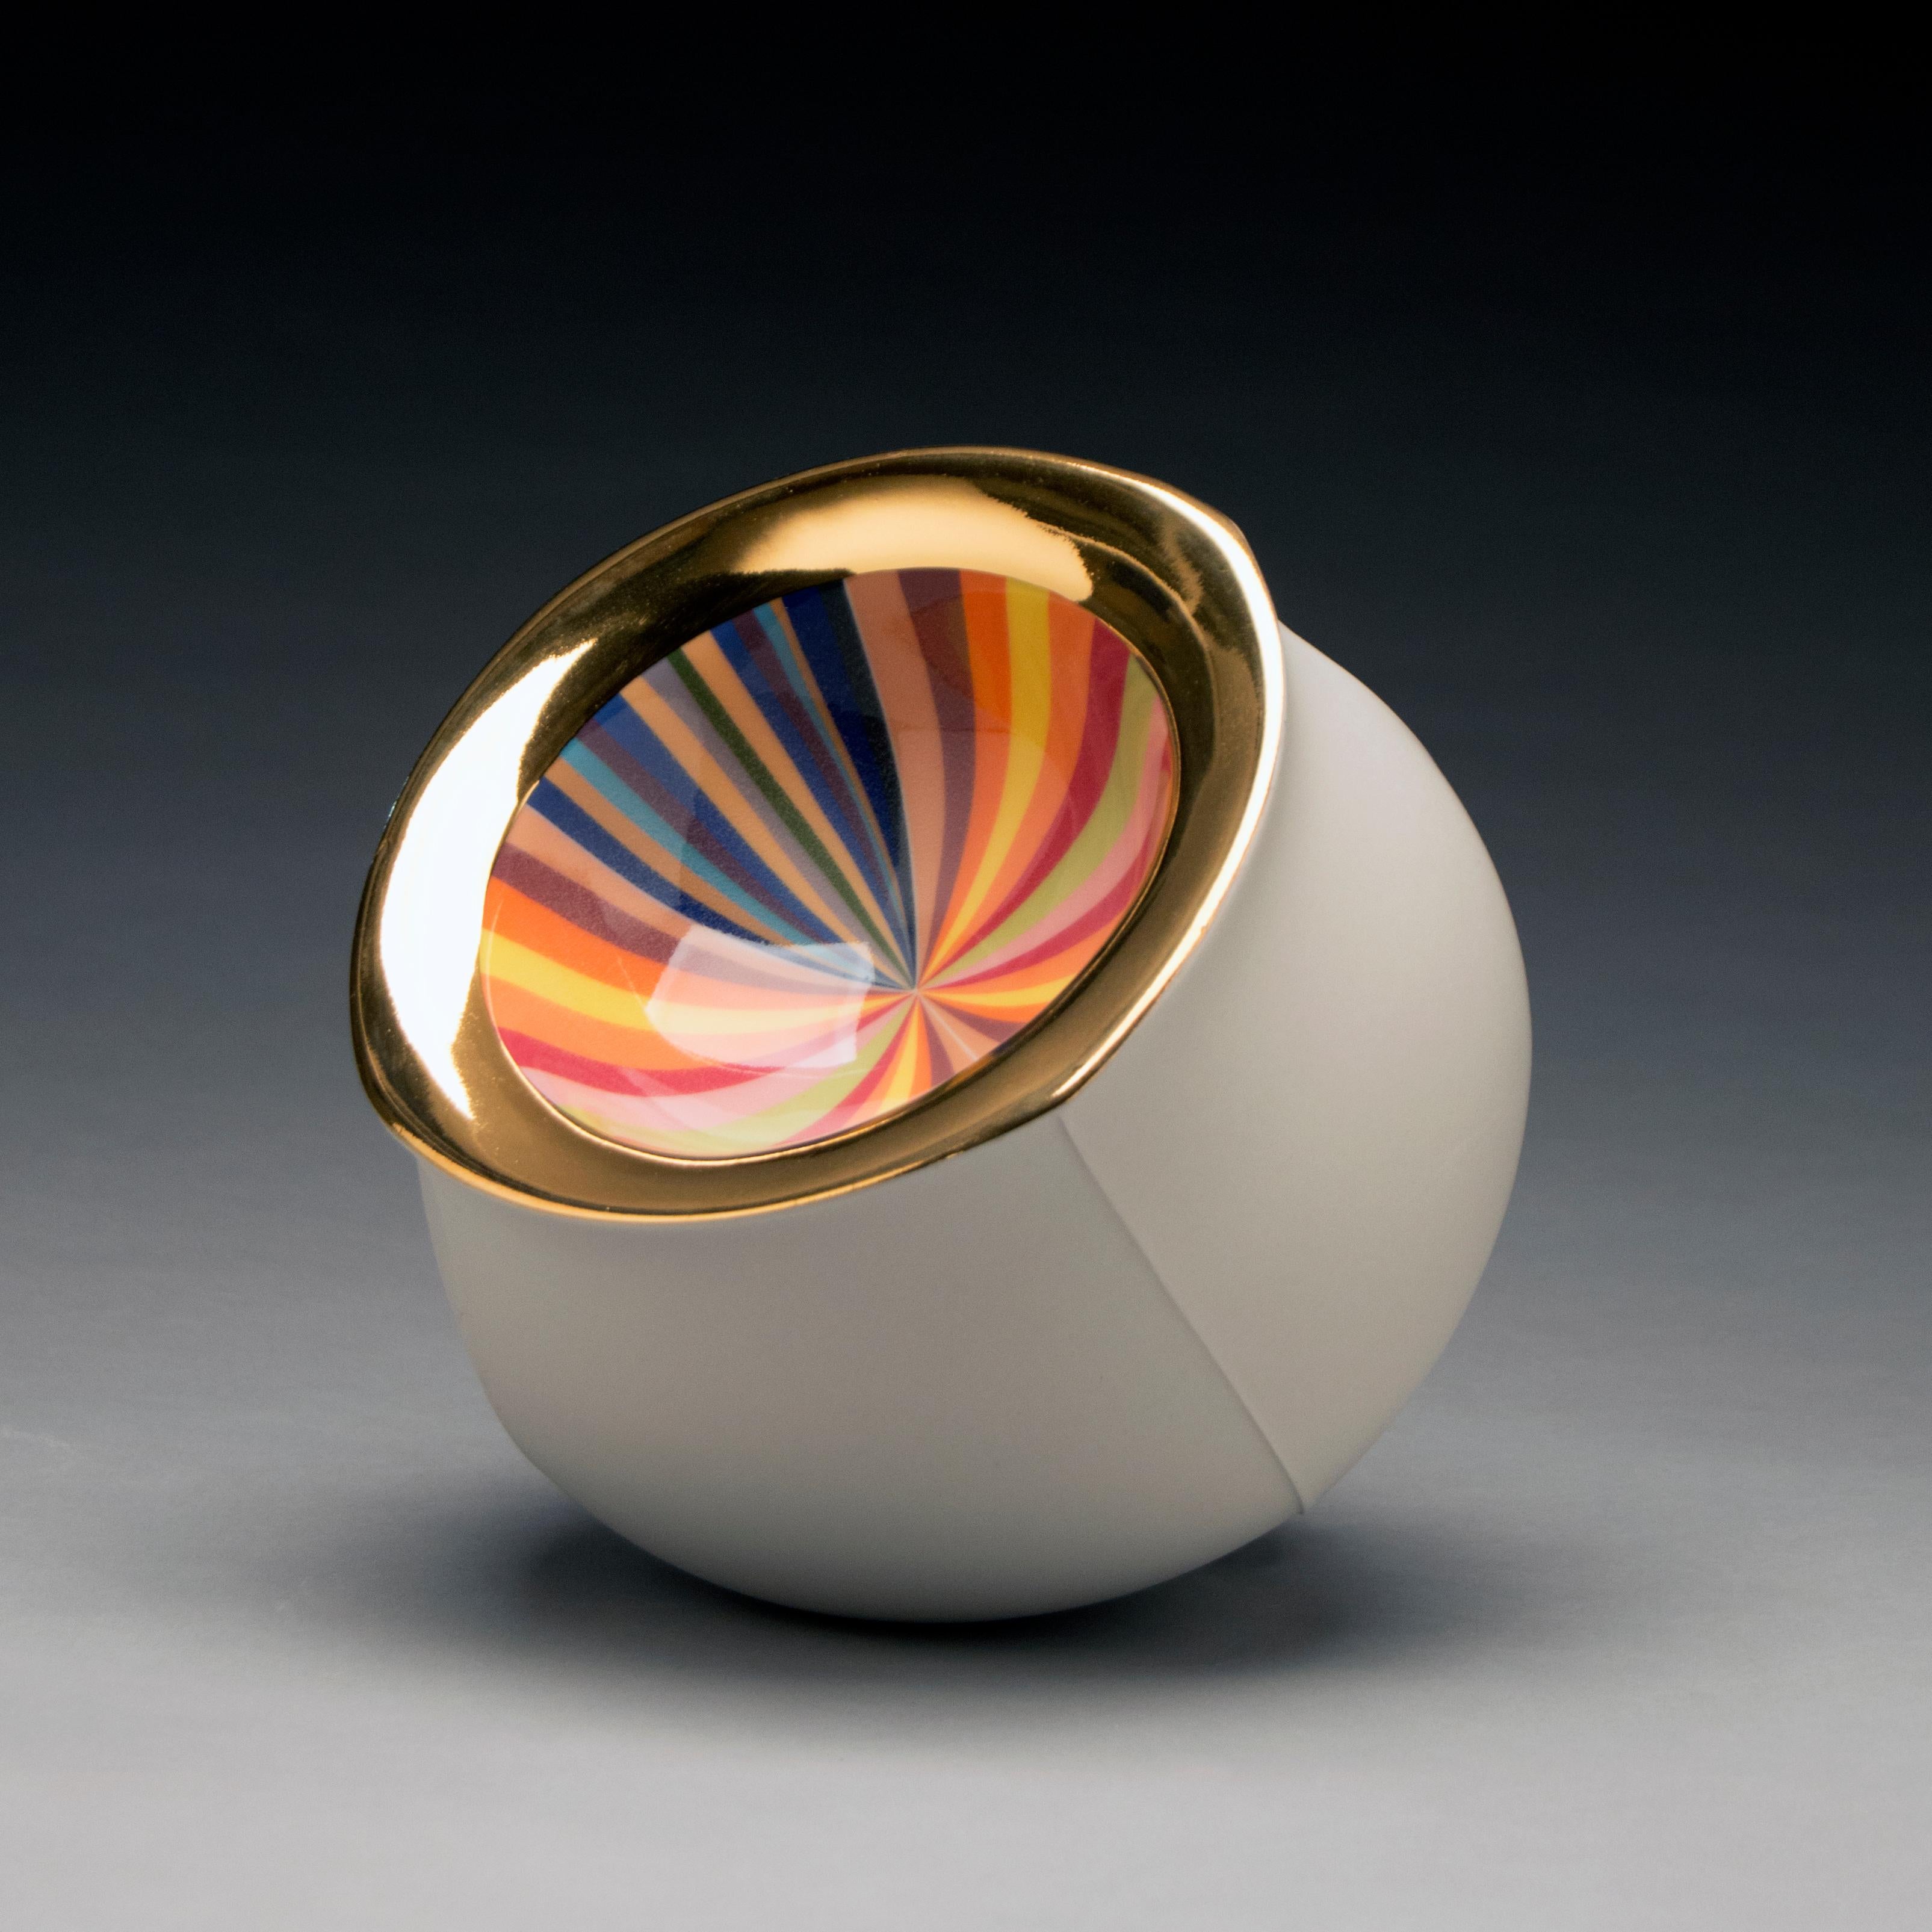 Peter Pincus Abstract Sculpture - Contemporary Ceramic Design, Porcelain Sculpture with Colorful Pattern and Glaze